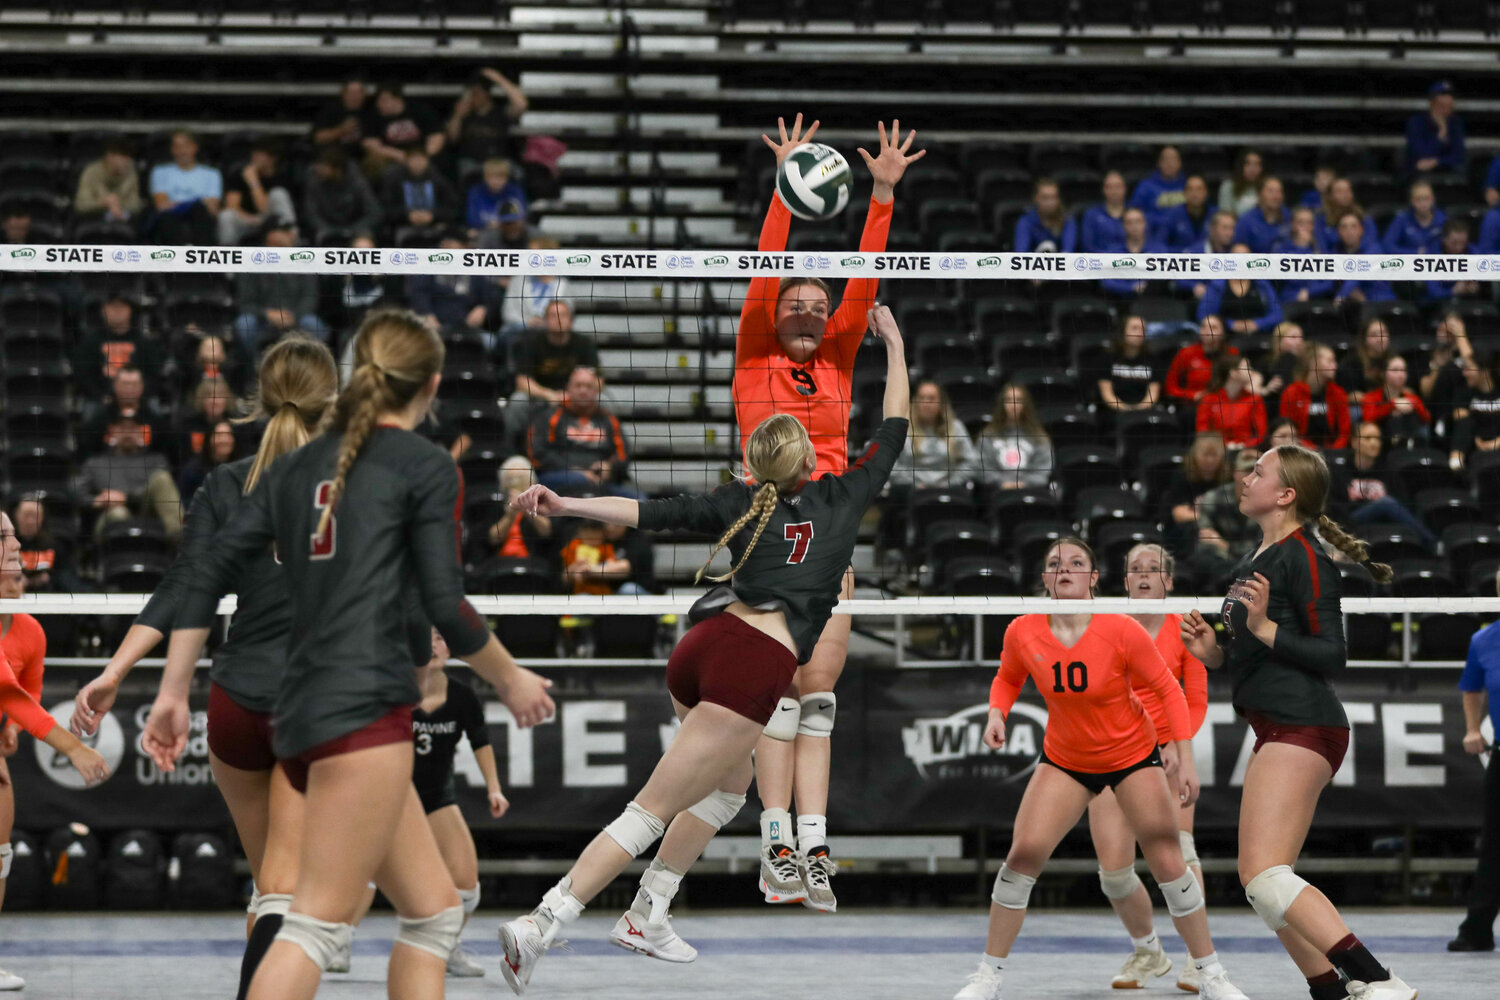 Keira O'Neill attempts to block the ball during Napavine's first-round matchup at the state tournament on Nov. 8 in Yakima.